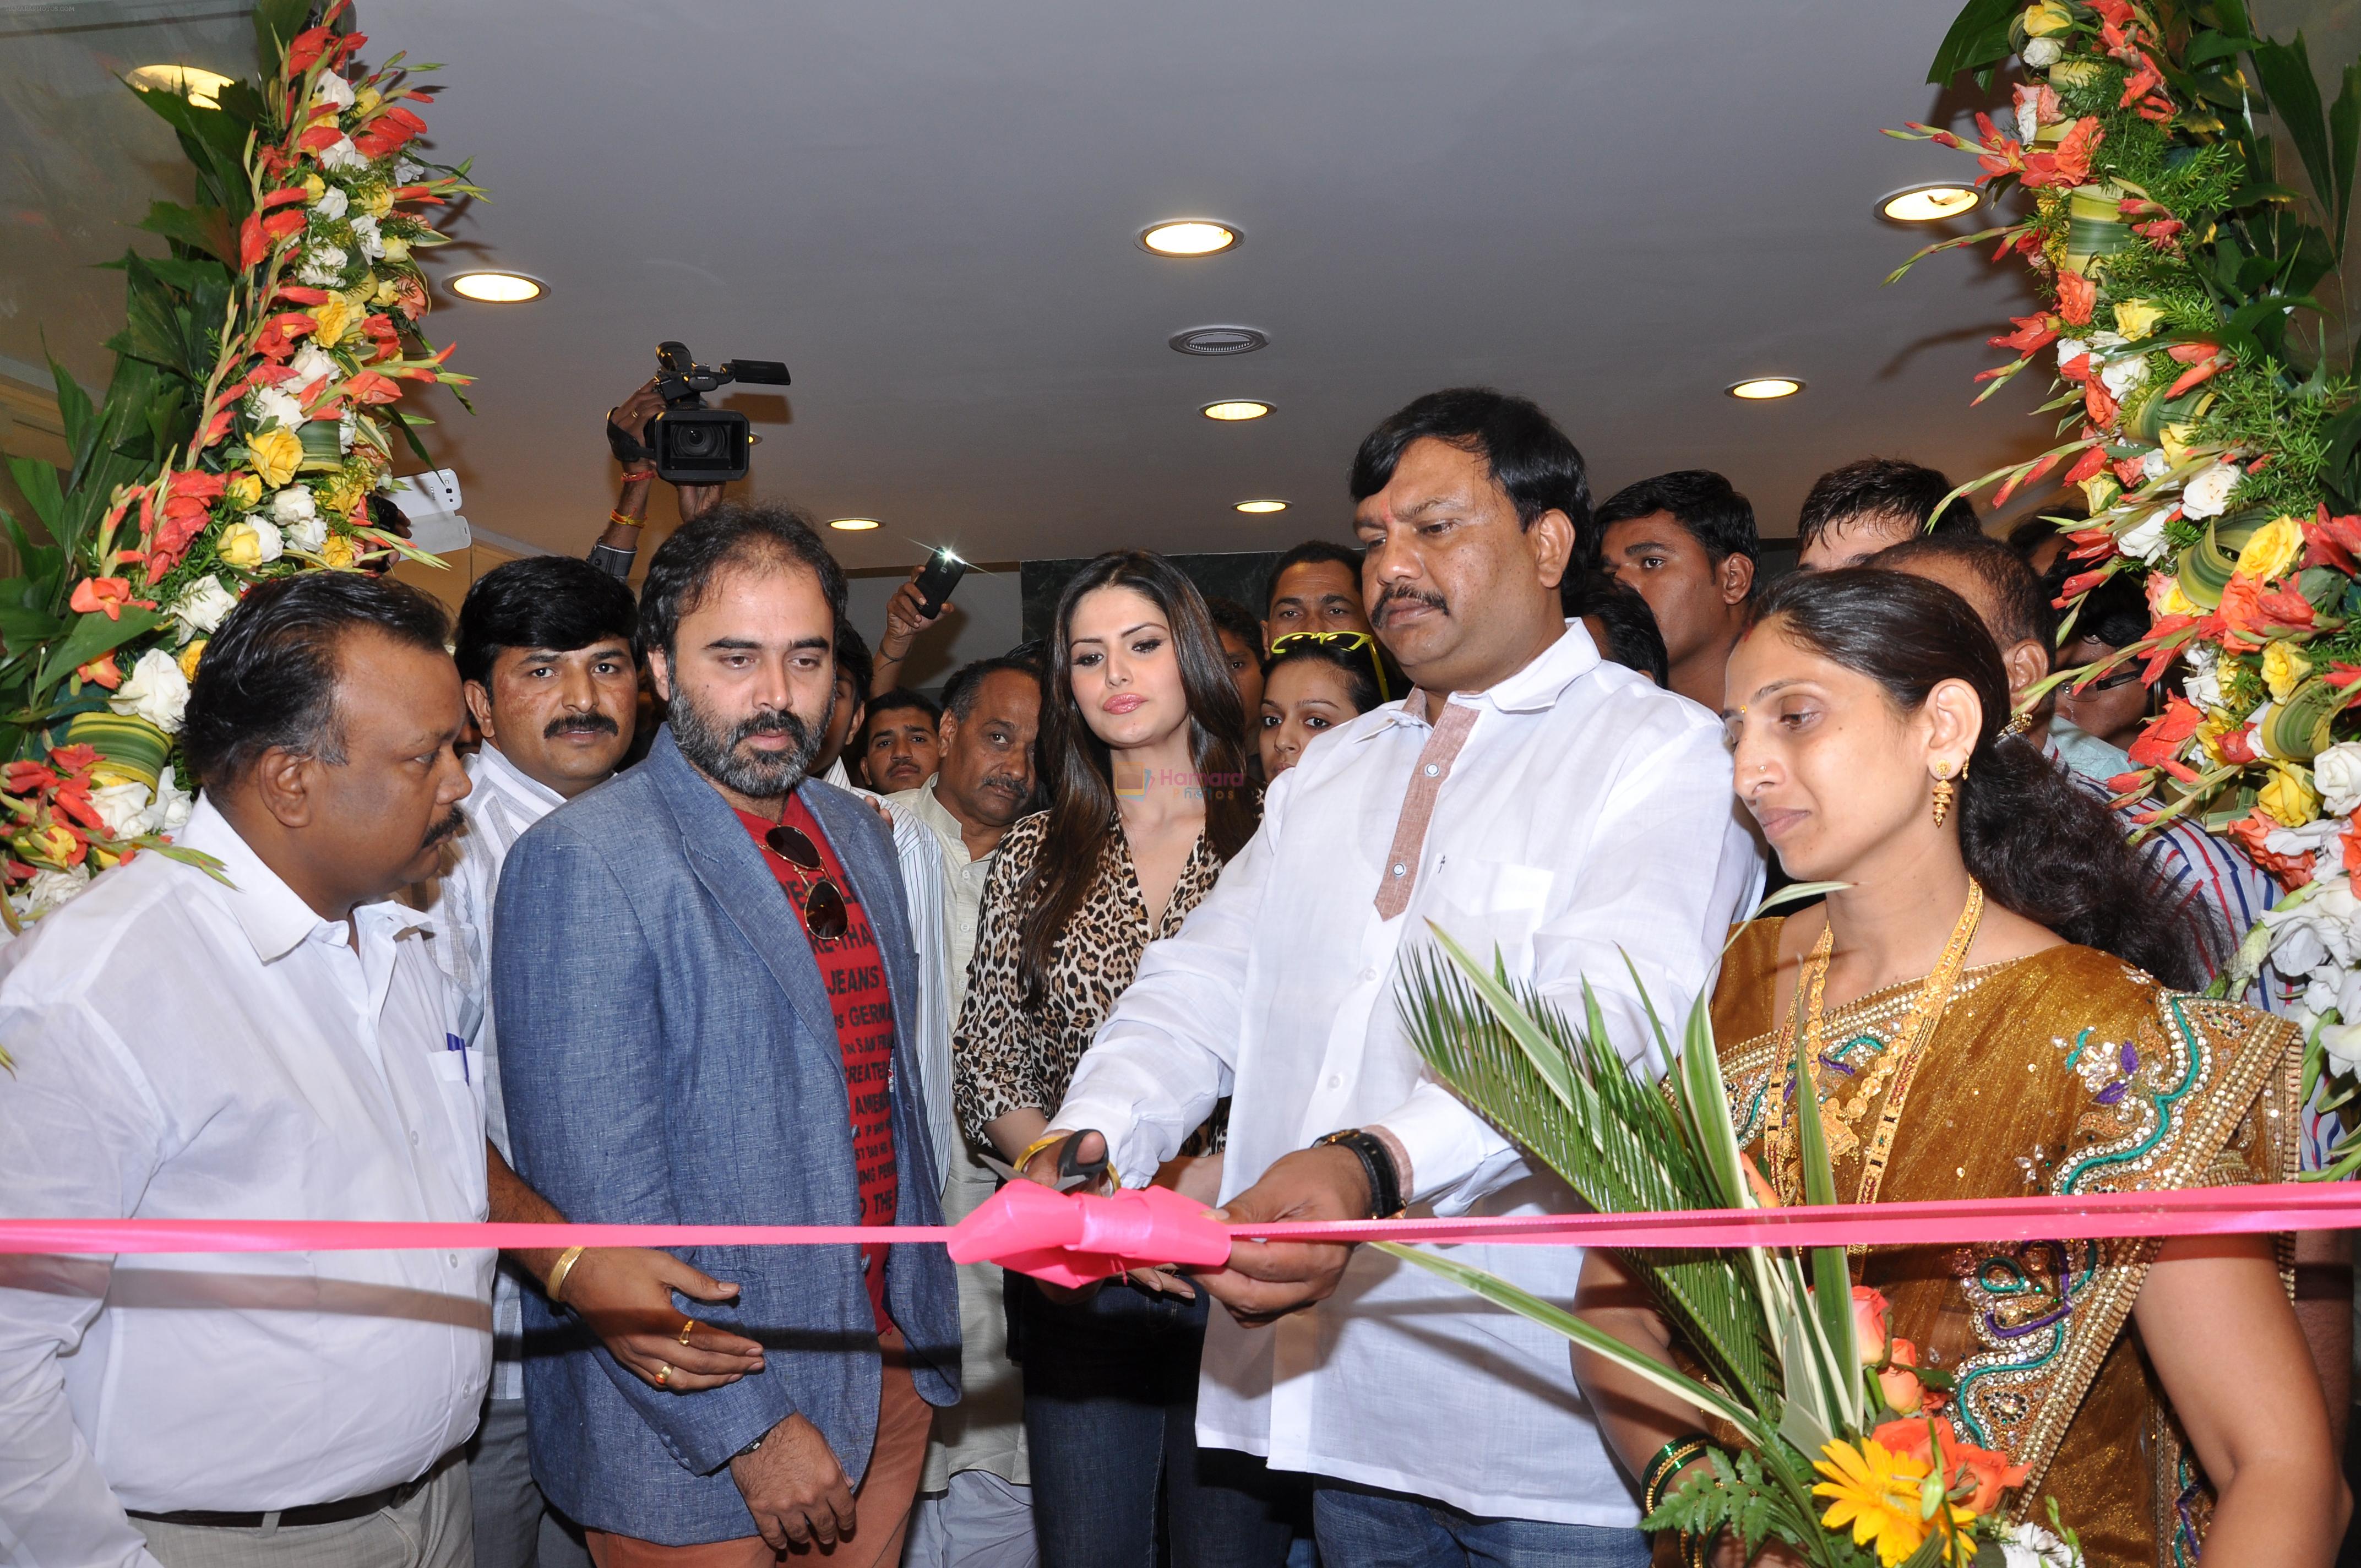 Zarine Khan at the Grand opening of Chhabra 555 store in Chakan on 10th Nov 2013